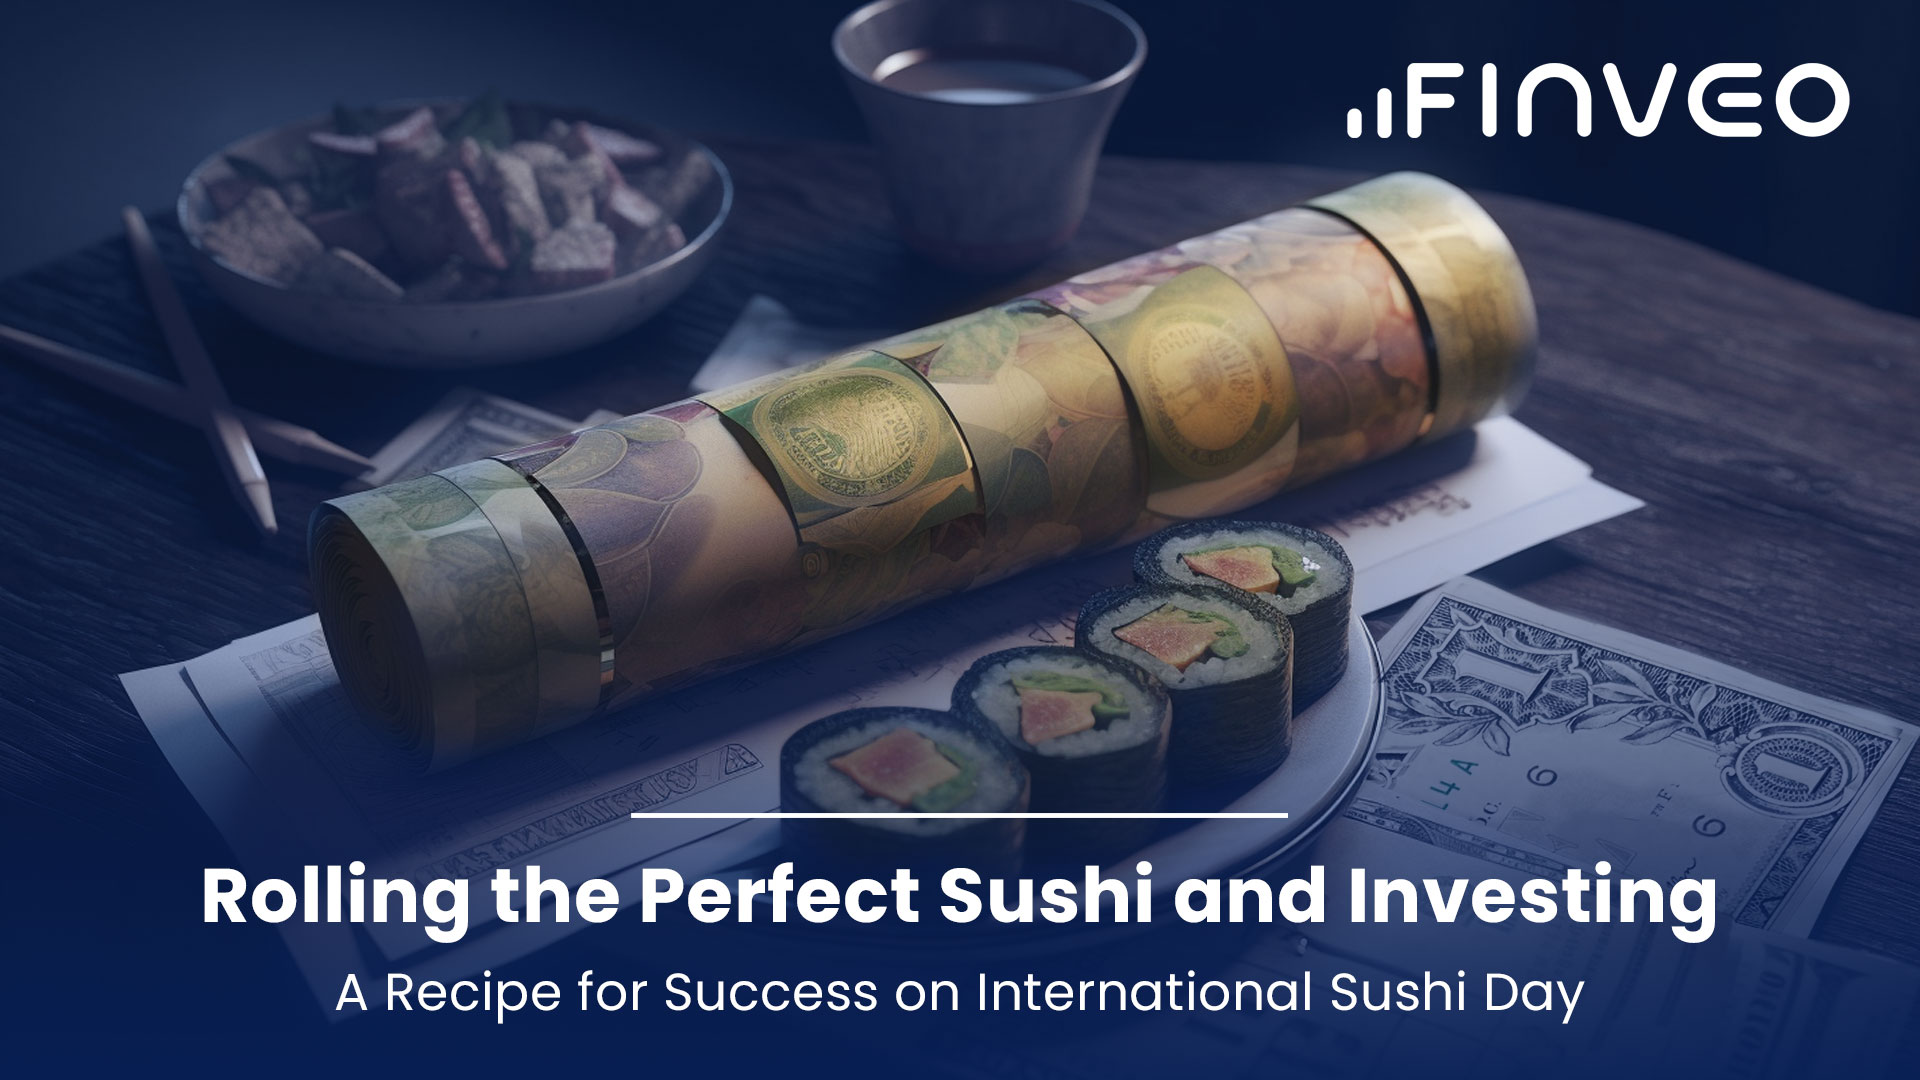 Rolling the Perfect Sushi and Investing: A Recipe for Success on International Sushi Day